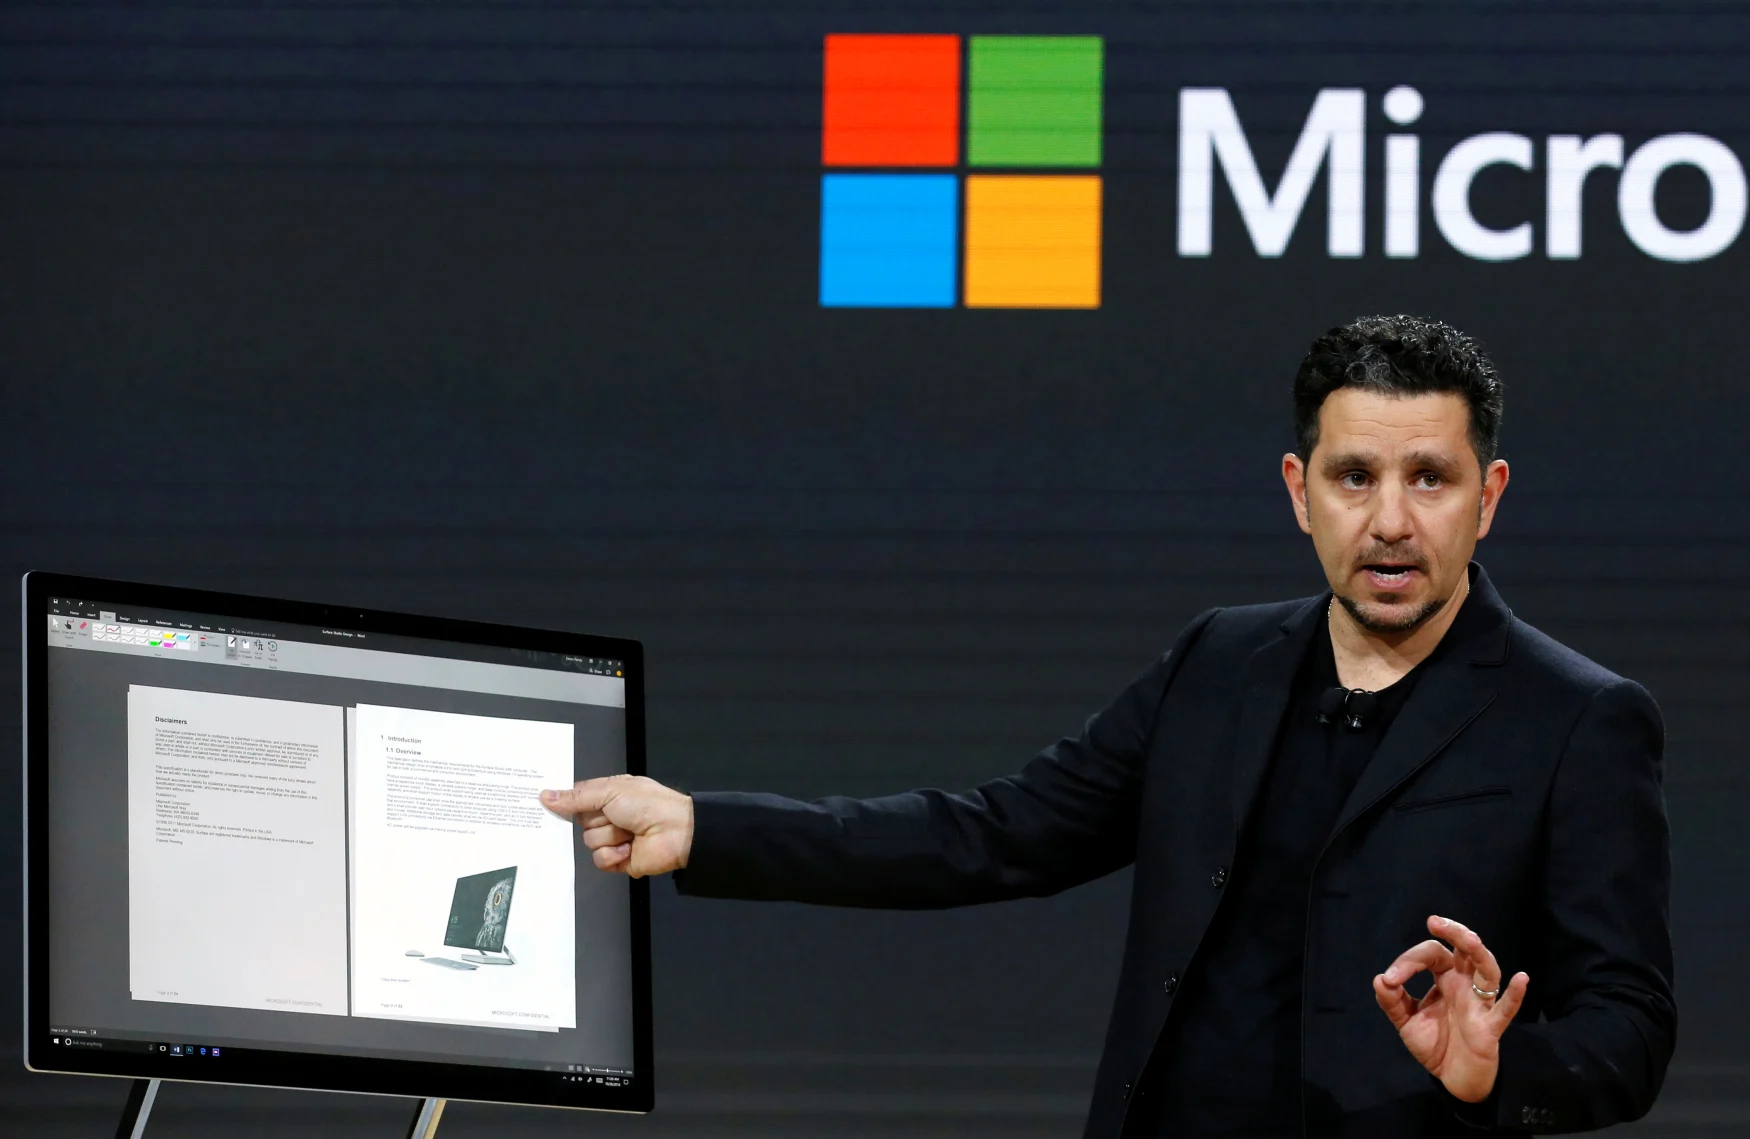 Panos Panay, Corporate Vice President for Surface Computing demonstrates the new Microsoft Surface Studio computer at a live event in the Manhattan borough of New York City, October 26, 2016. REUTERS/Lucas Jackson